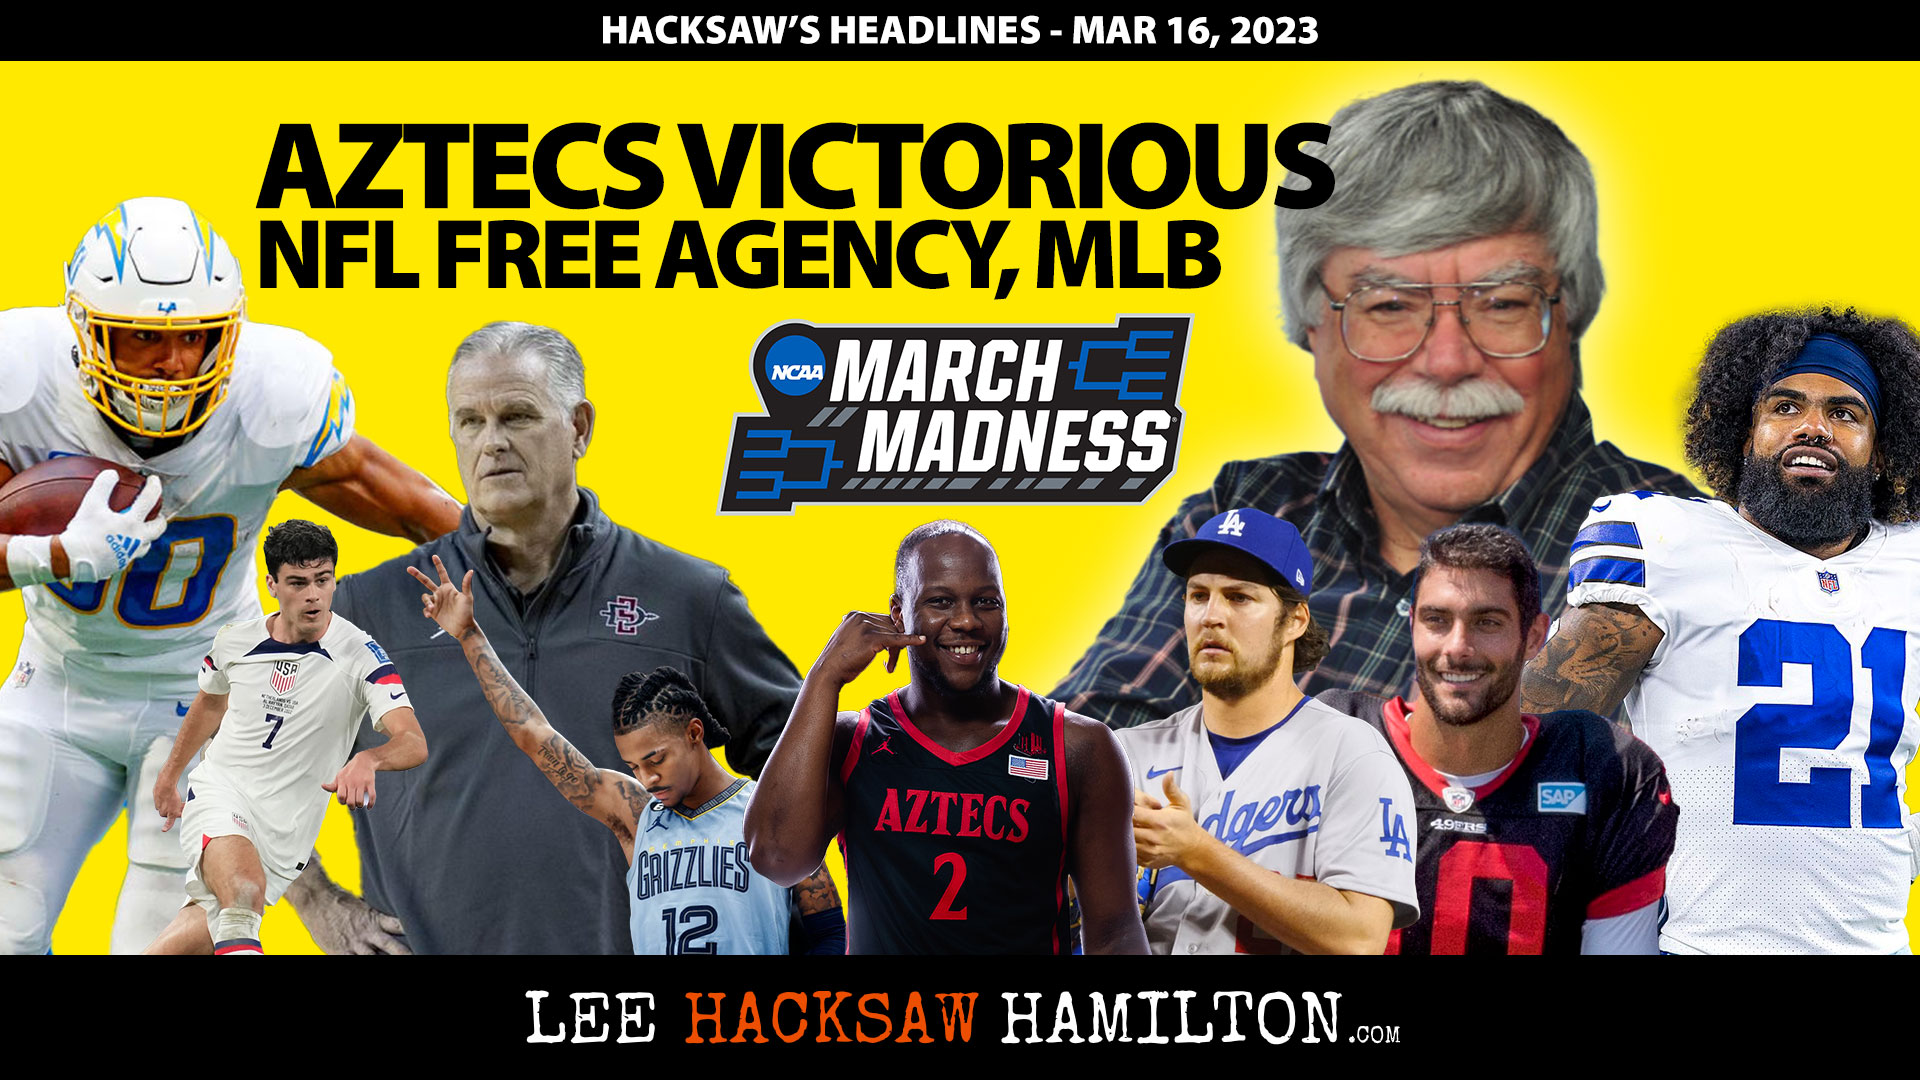 Lee Hacksaw Hamilton discusses Aztecs defeat Charleston, March Madness Games, NFL Free Agents, Padres, Dodgers